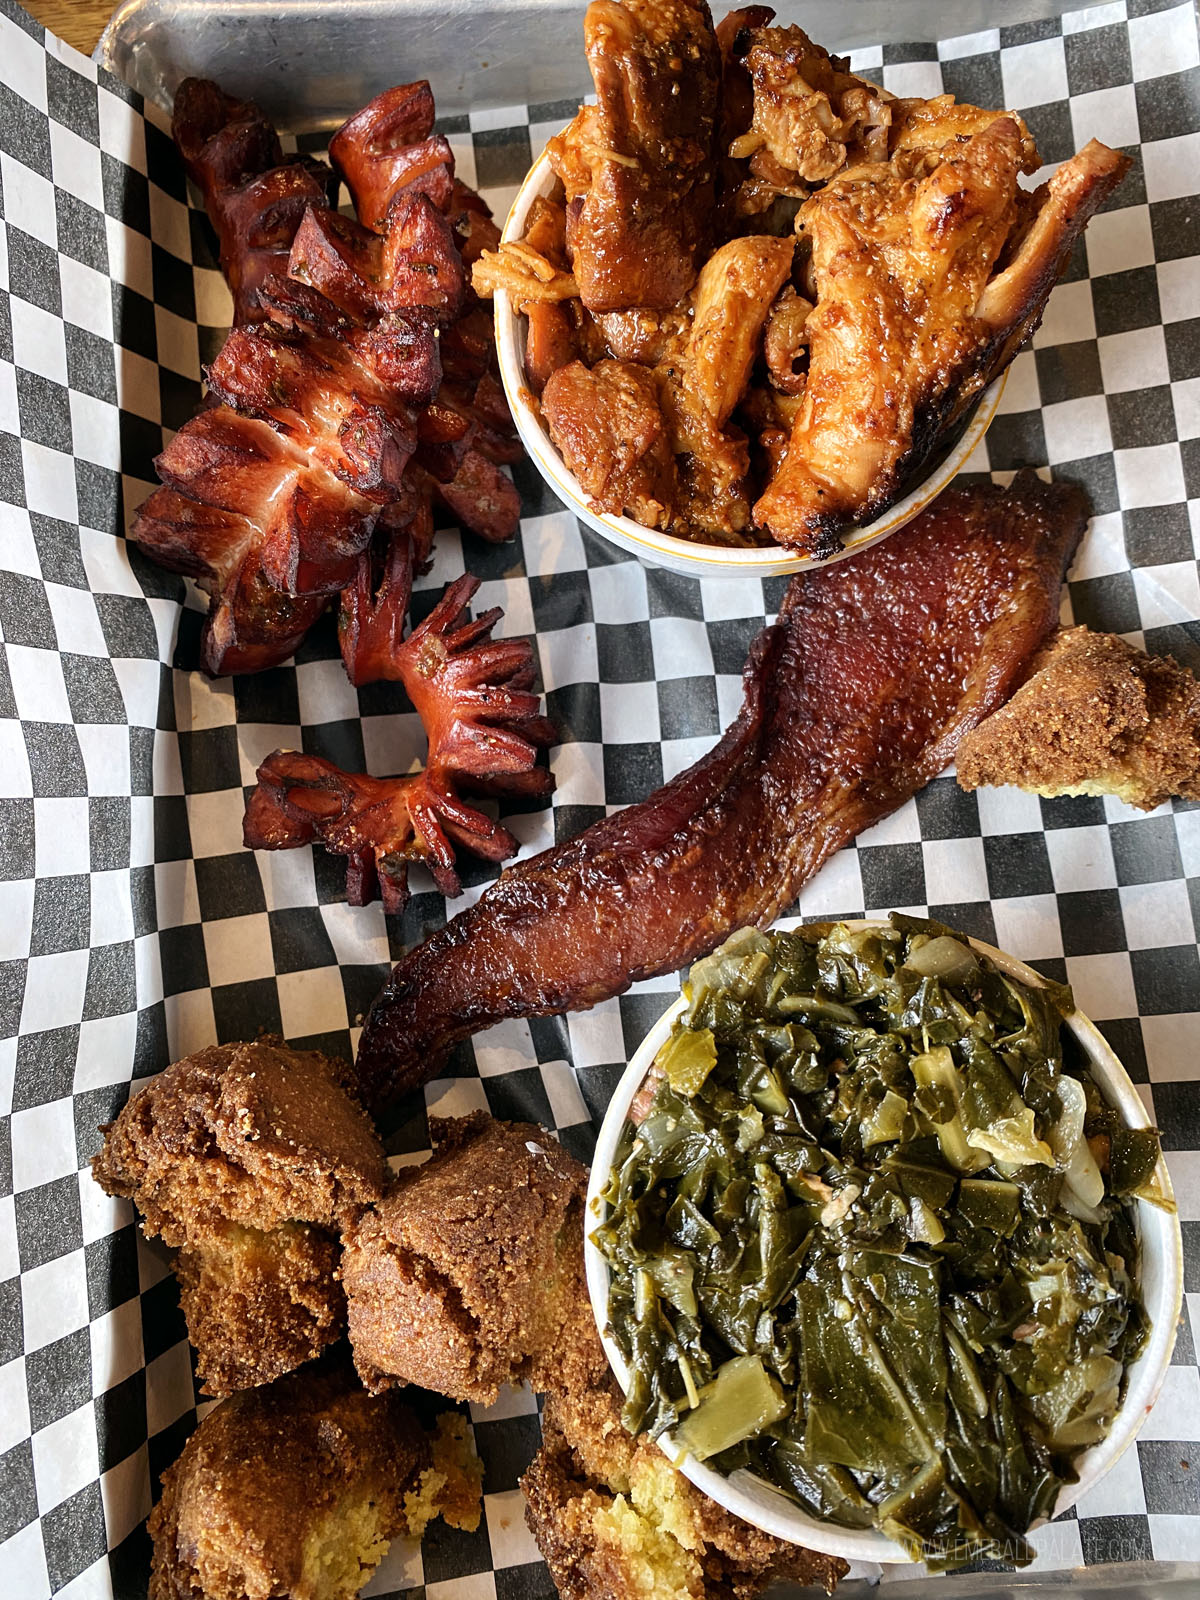 plate of smoked sausage, smoked chicken, collard greens, and pulled pork